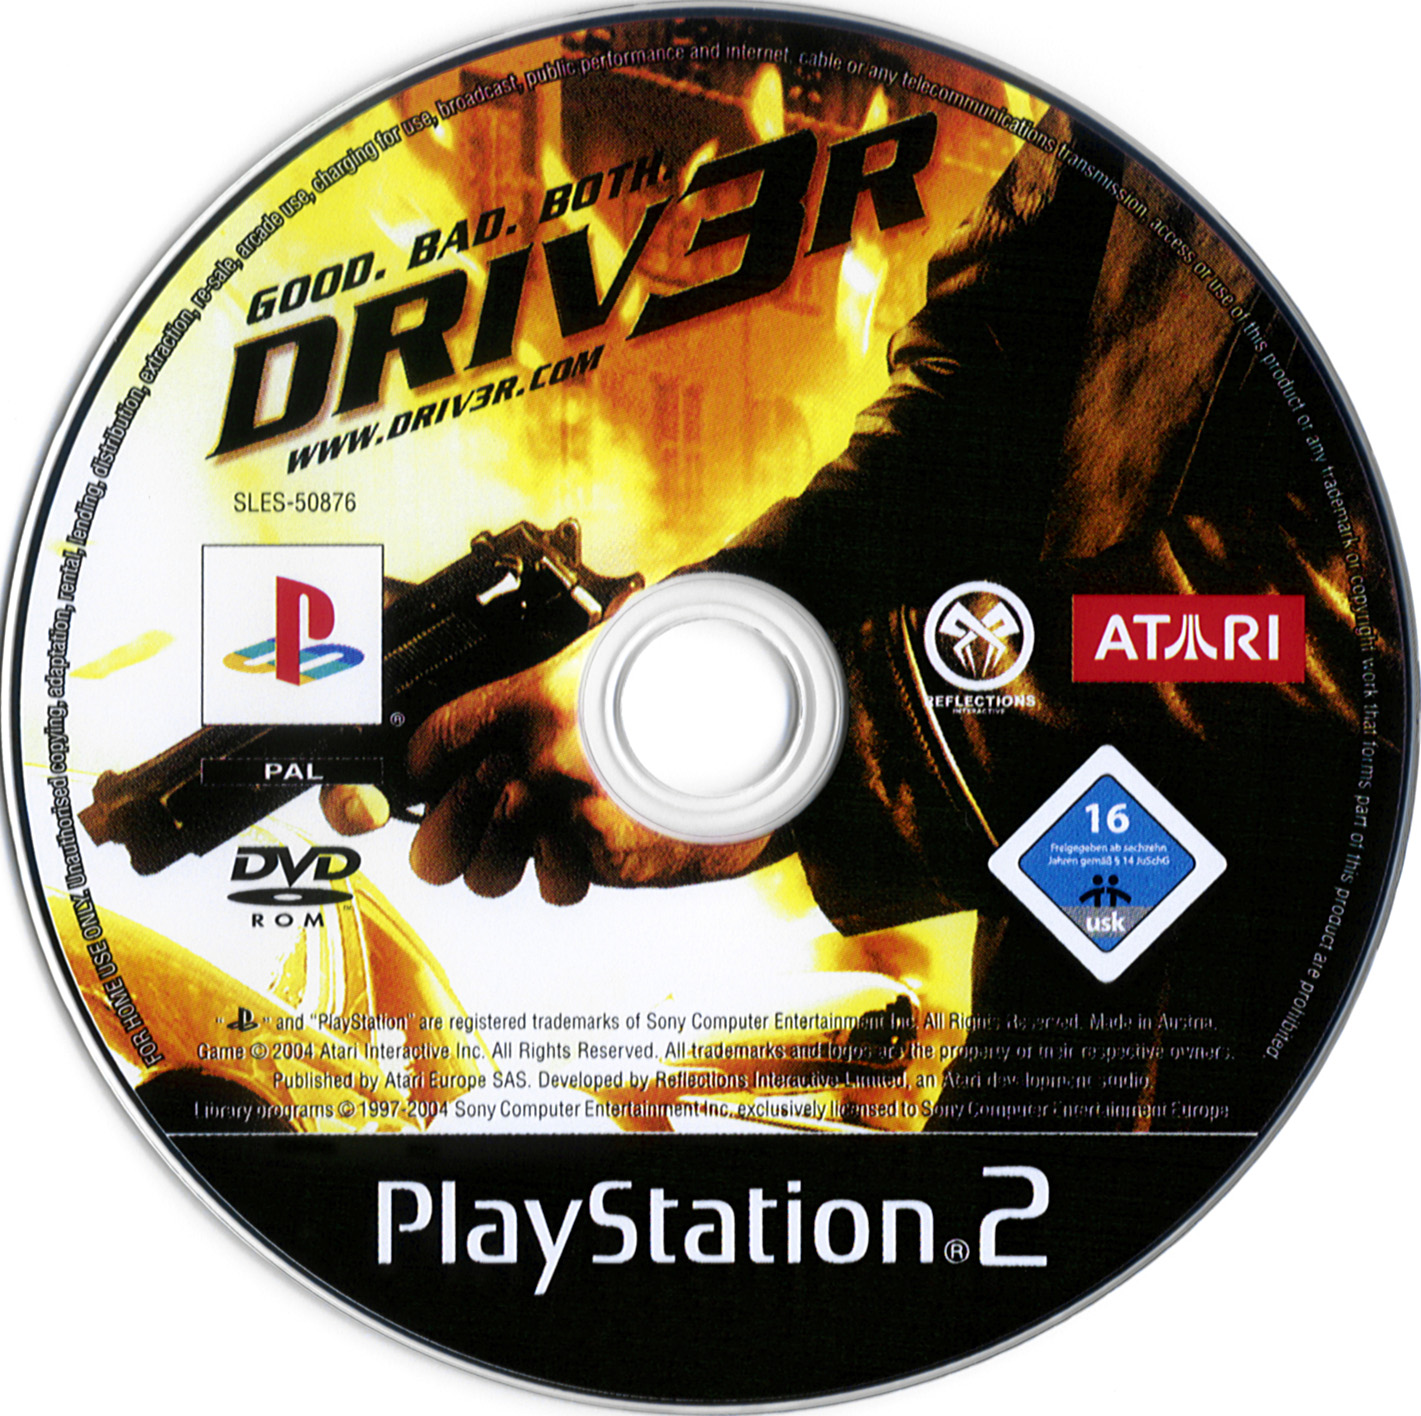 curb nicotine Do not Driv3r (PS2, Xbox, Windows) (gamerip) (2004) MP3 - Download Driv3r (PS2,  Xbox, Windows) (gamerip) (2004) Soundtracks for FREE!